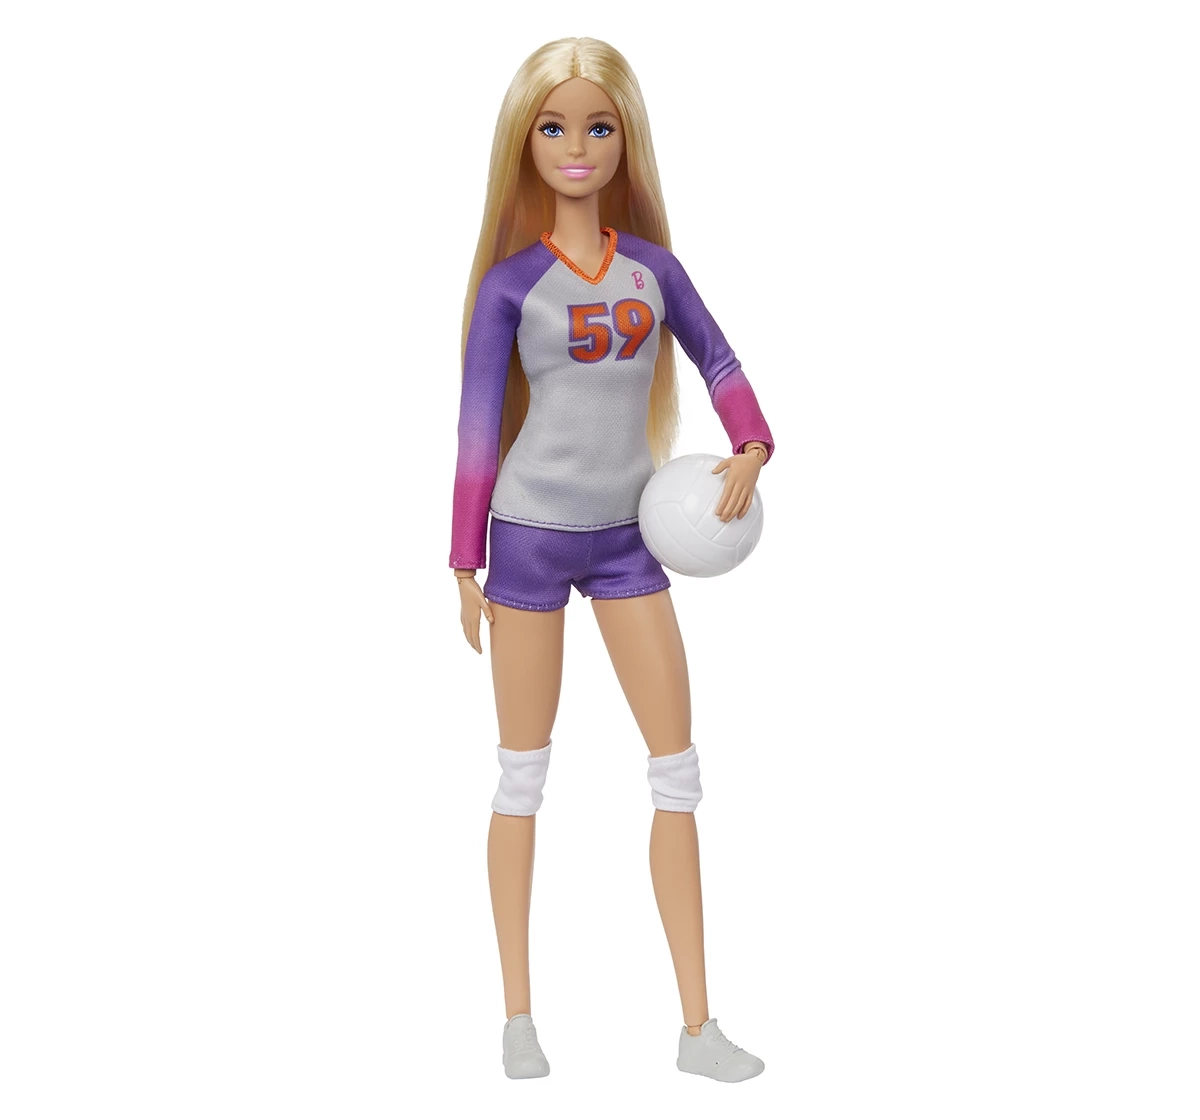 Barbie Doll & Accessories, Made to Move Career Volleyball Player Doll with Uniform and Ball, Kids for 3Y+, Multicolour, Assorted